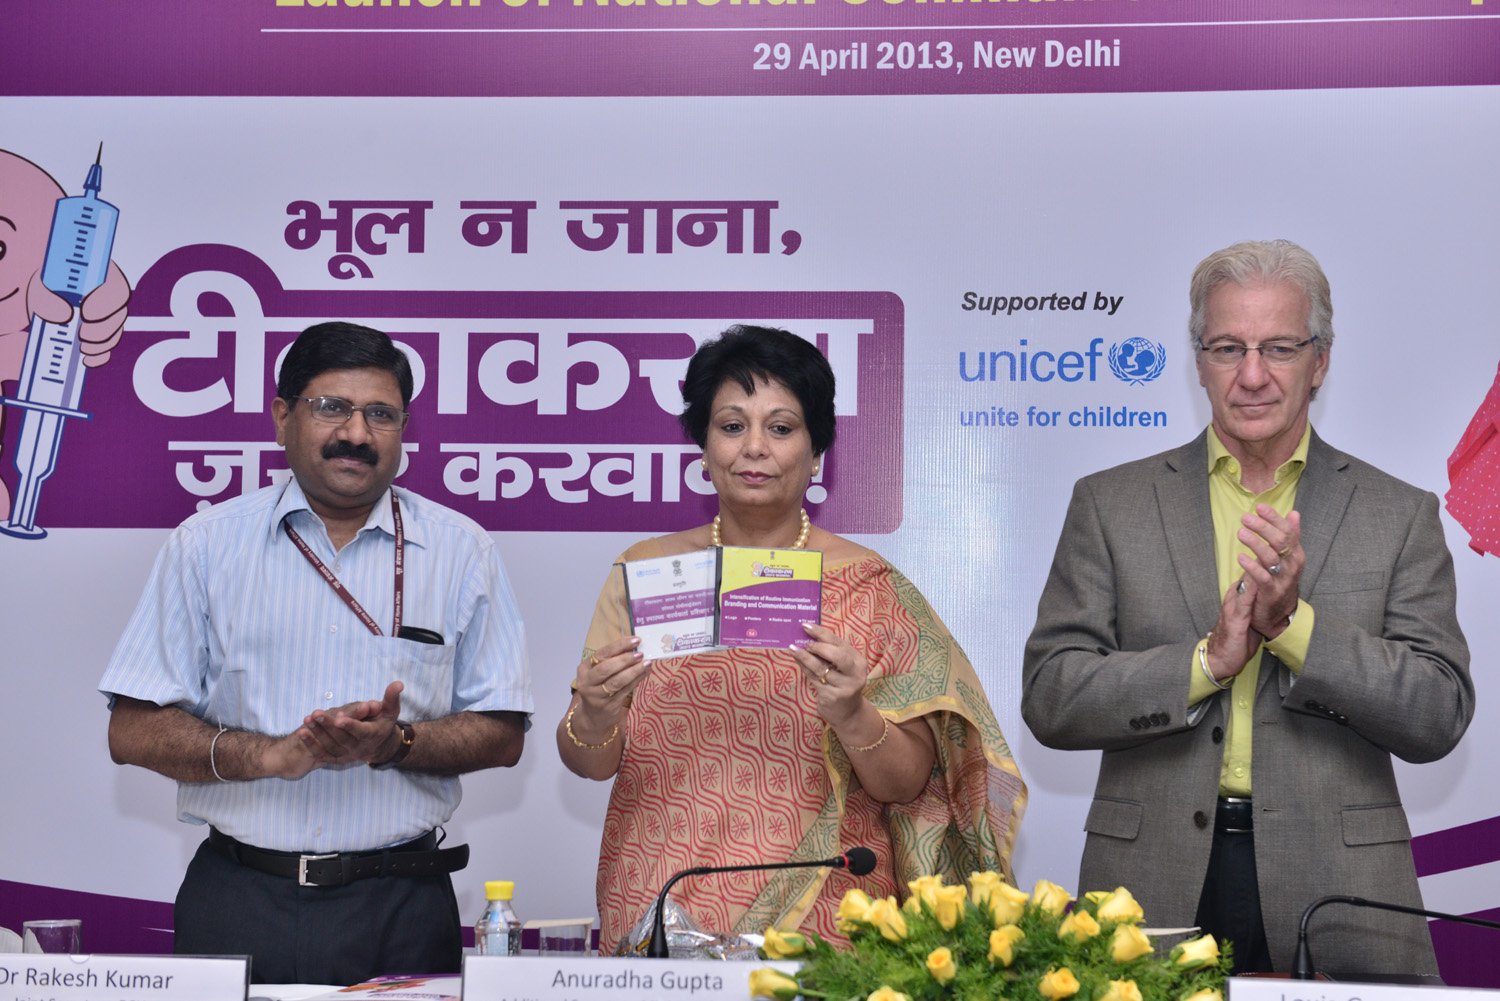 Releasing the CD's on awareness campaign (L-R) Dr Rakesh Kumar-Ministry of Health and Family Welfare, Anuradha Gupta-NHRM, Louis-Georges Arsenault, UNICEF representative to India